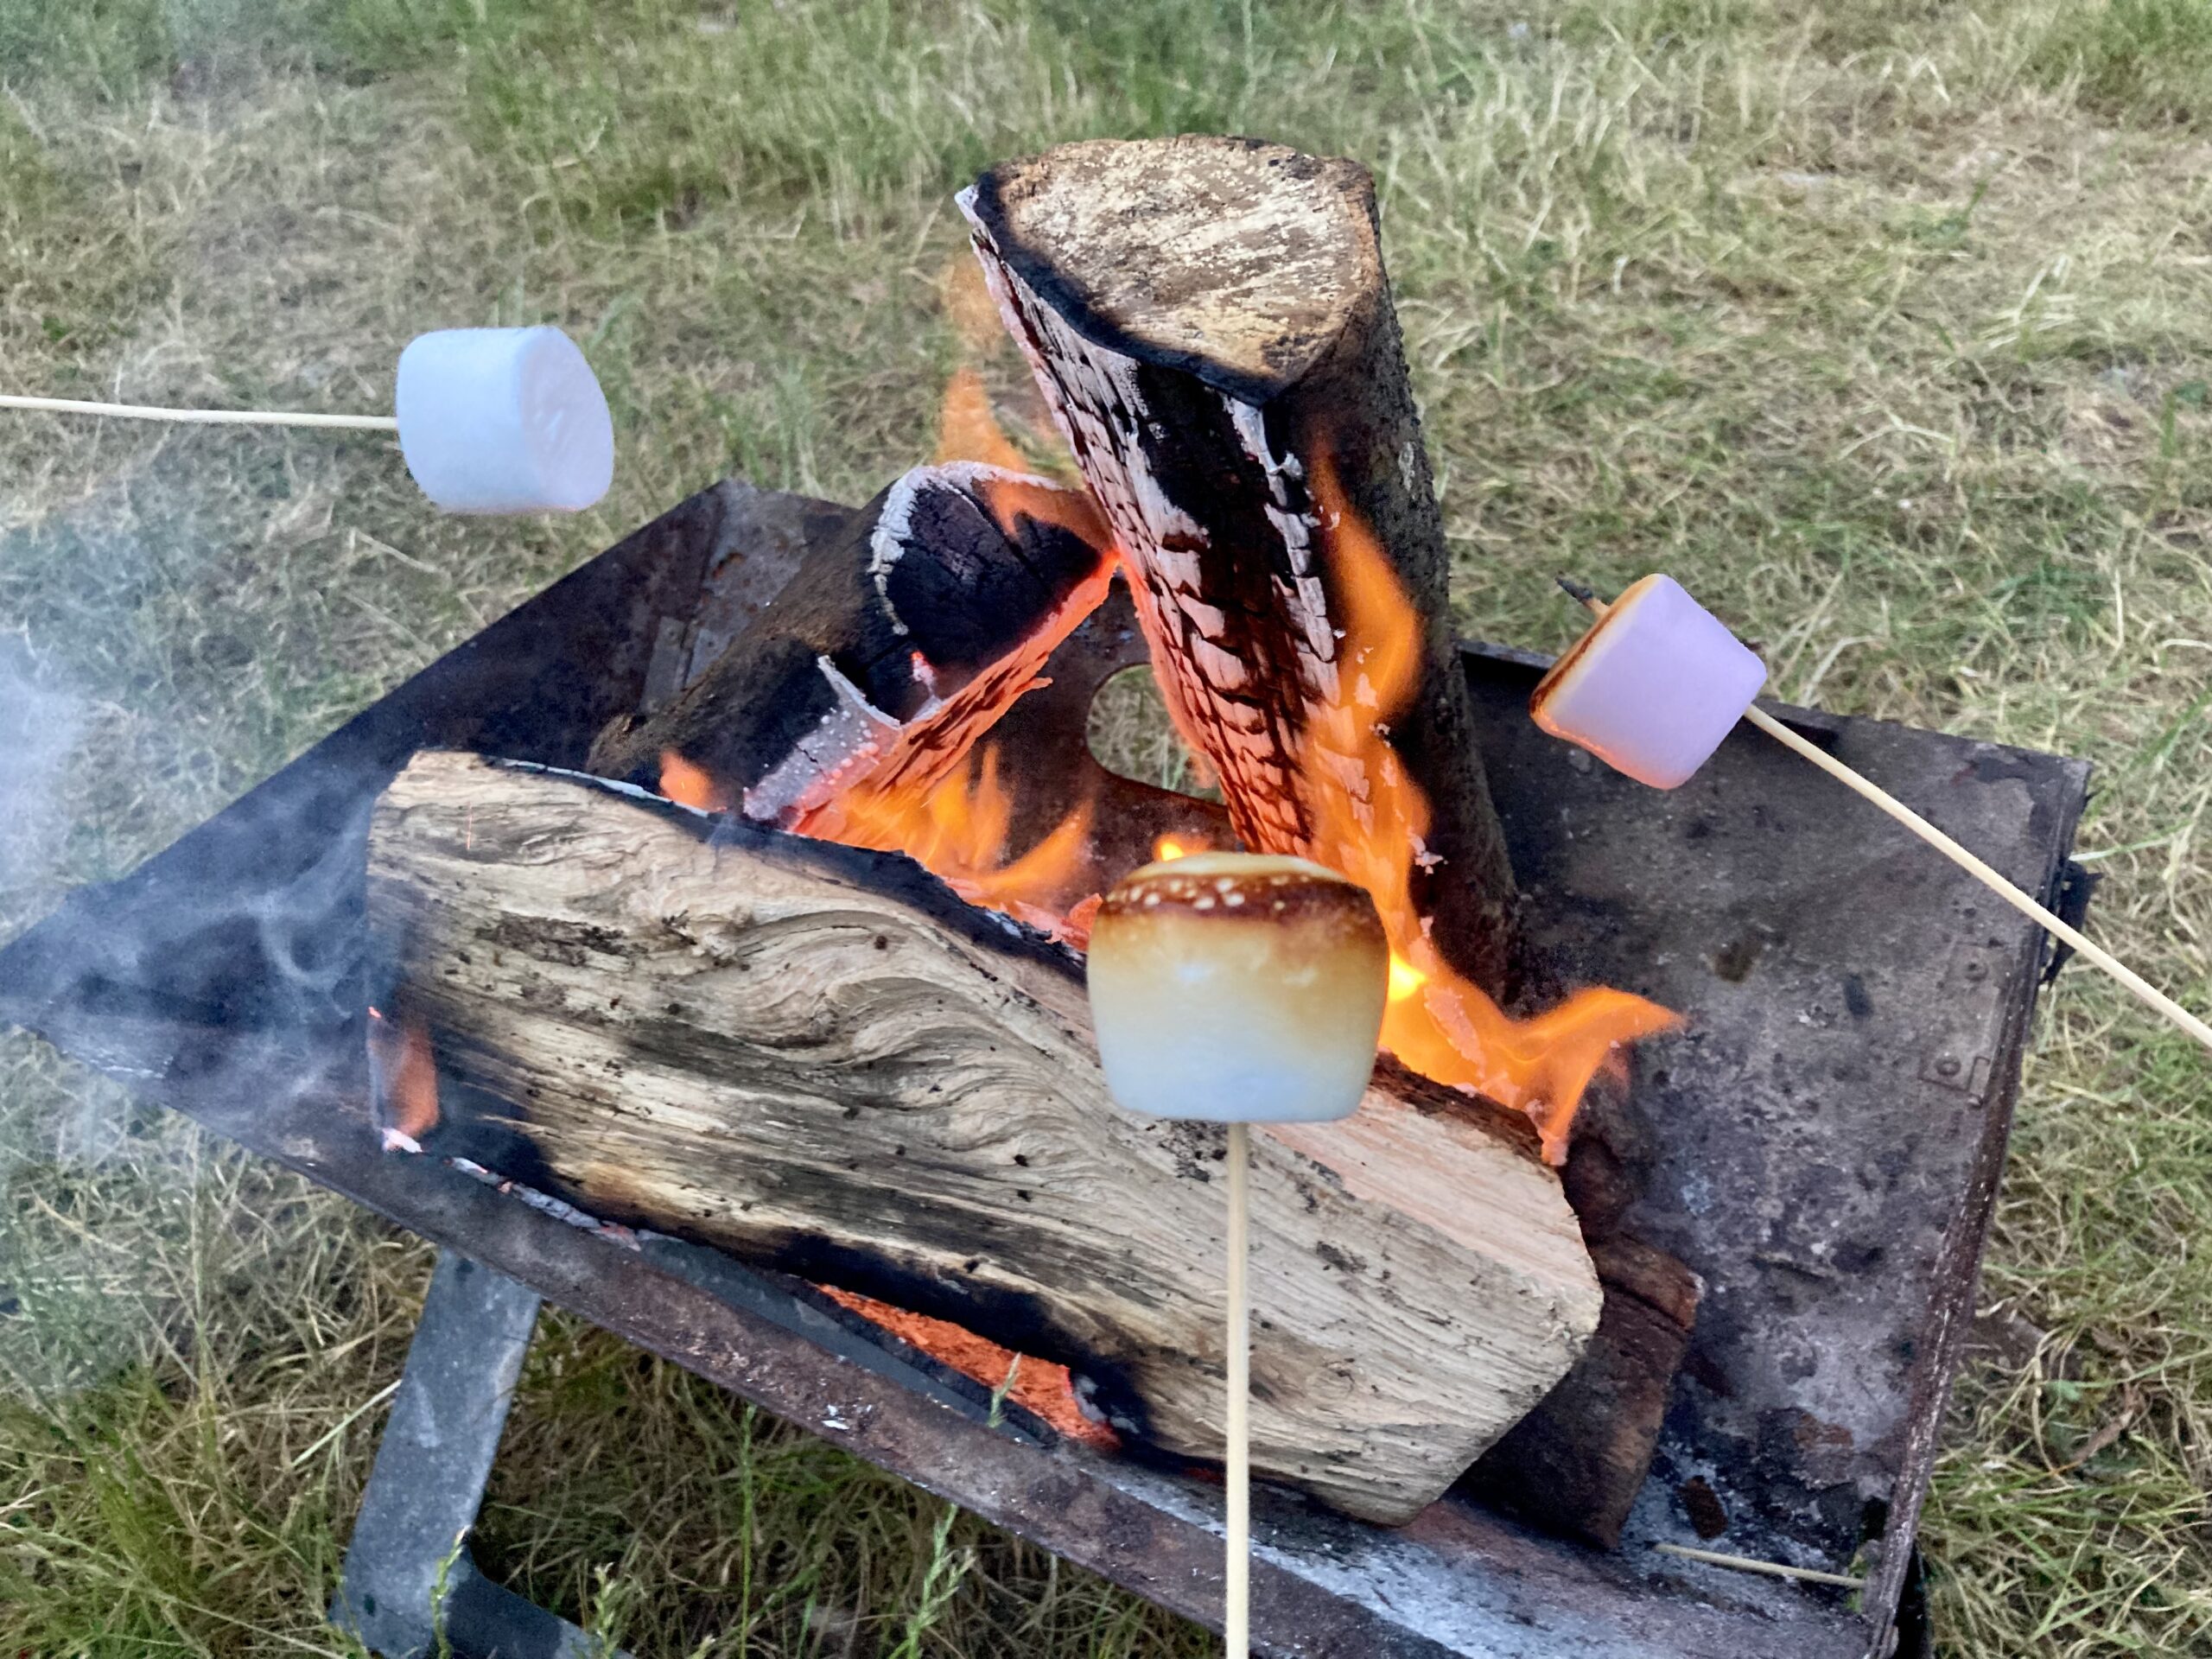 Marshmallows on the fire